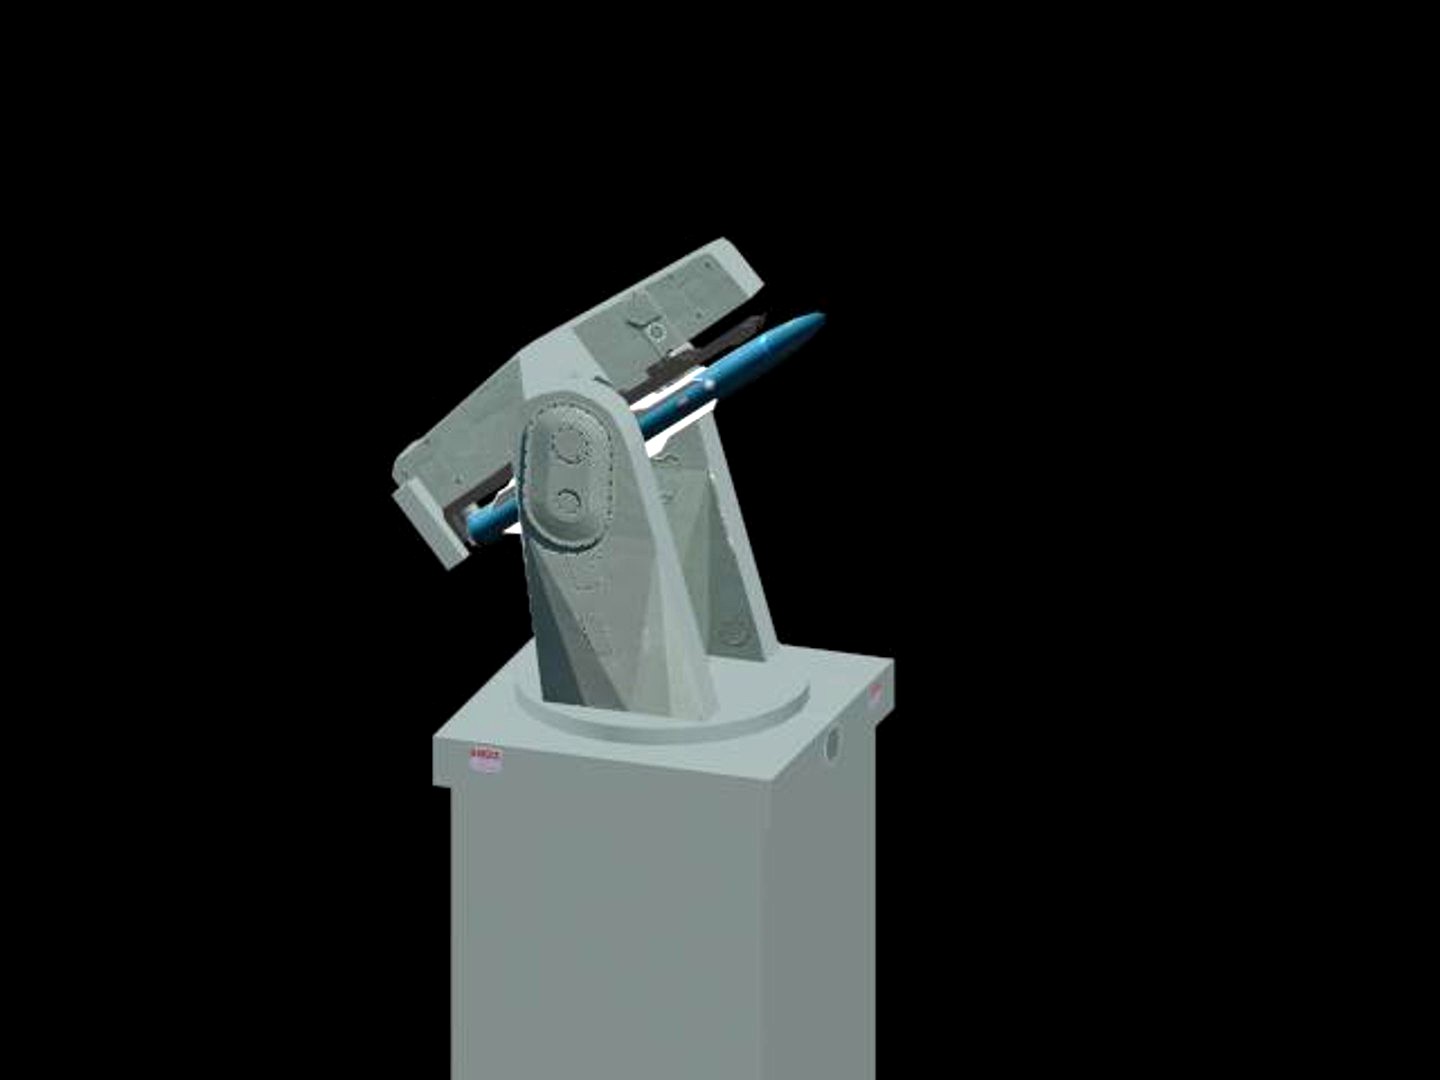 MK 13/22 TARTAR Guided Missile Launching System / w Animated Targeting and Missile Launch Sequences - by Xacta  3D models